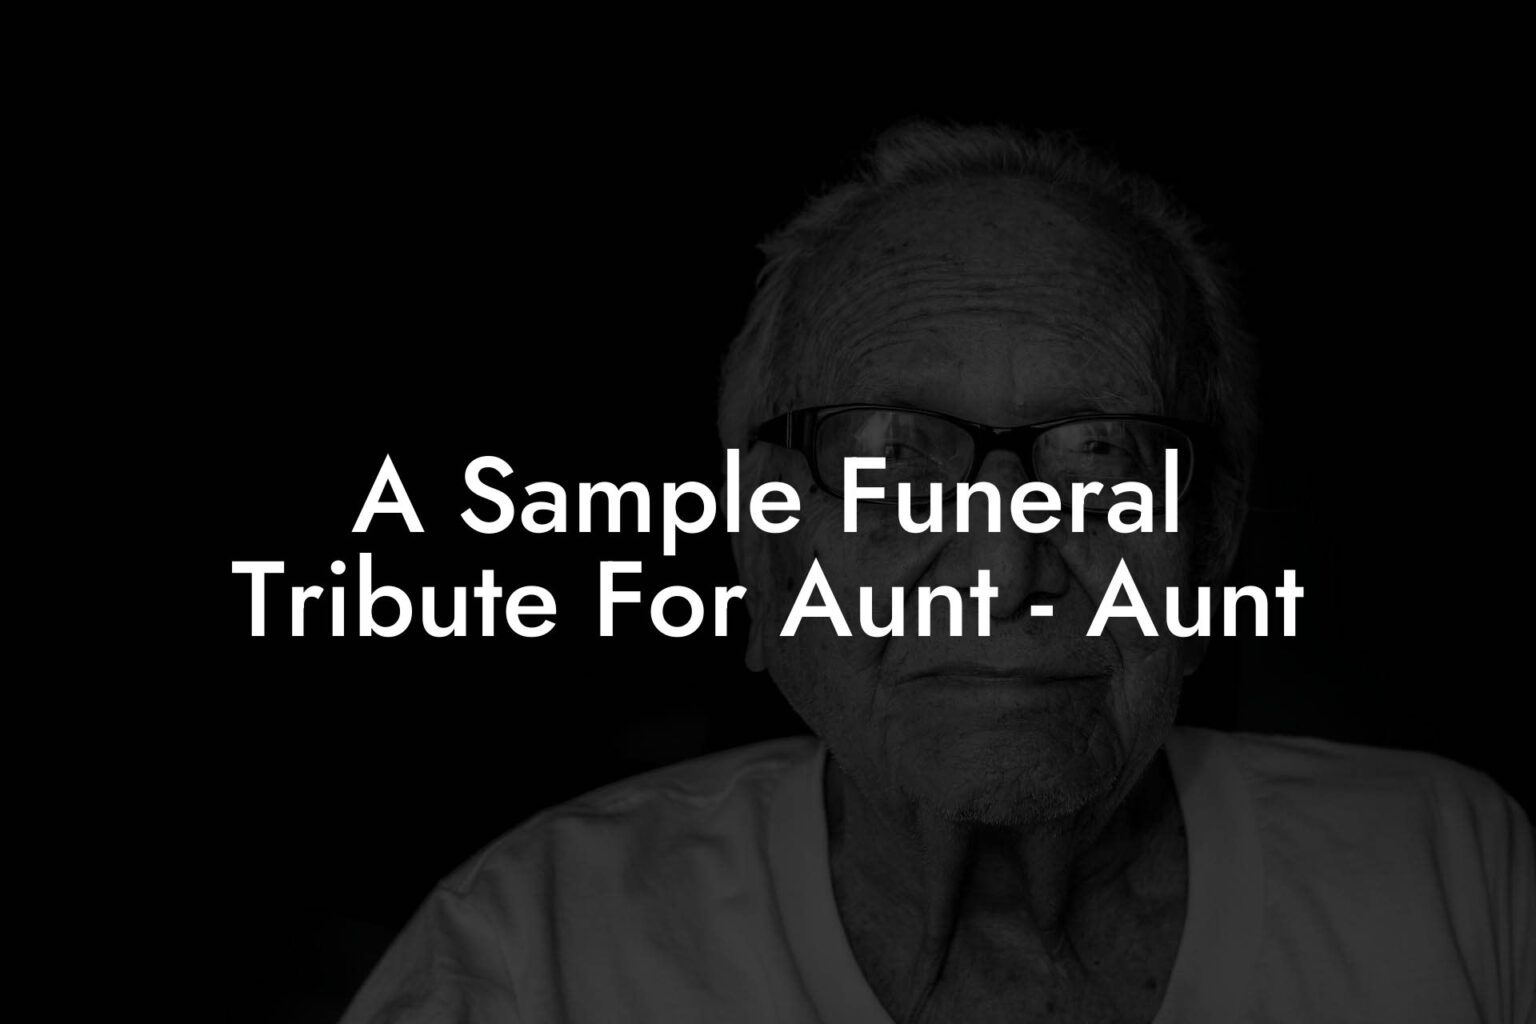 a-sample-funeral-tribute-for-aunt-aunt-eulogy-assistant